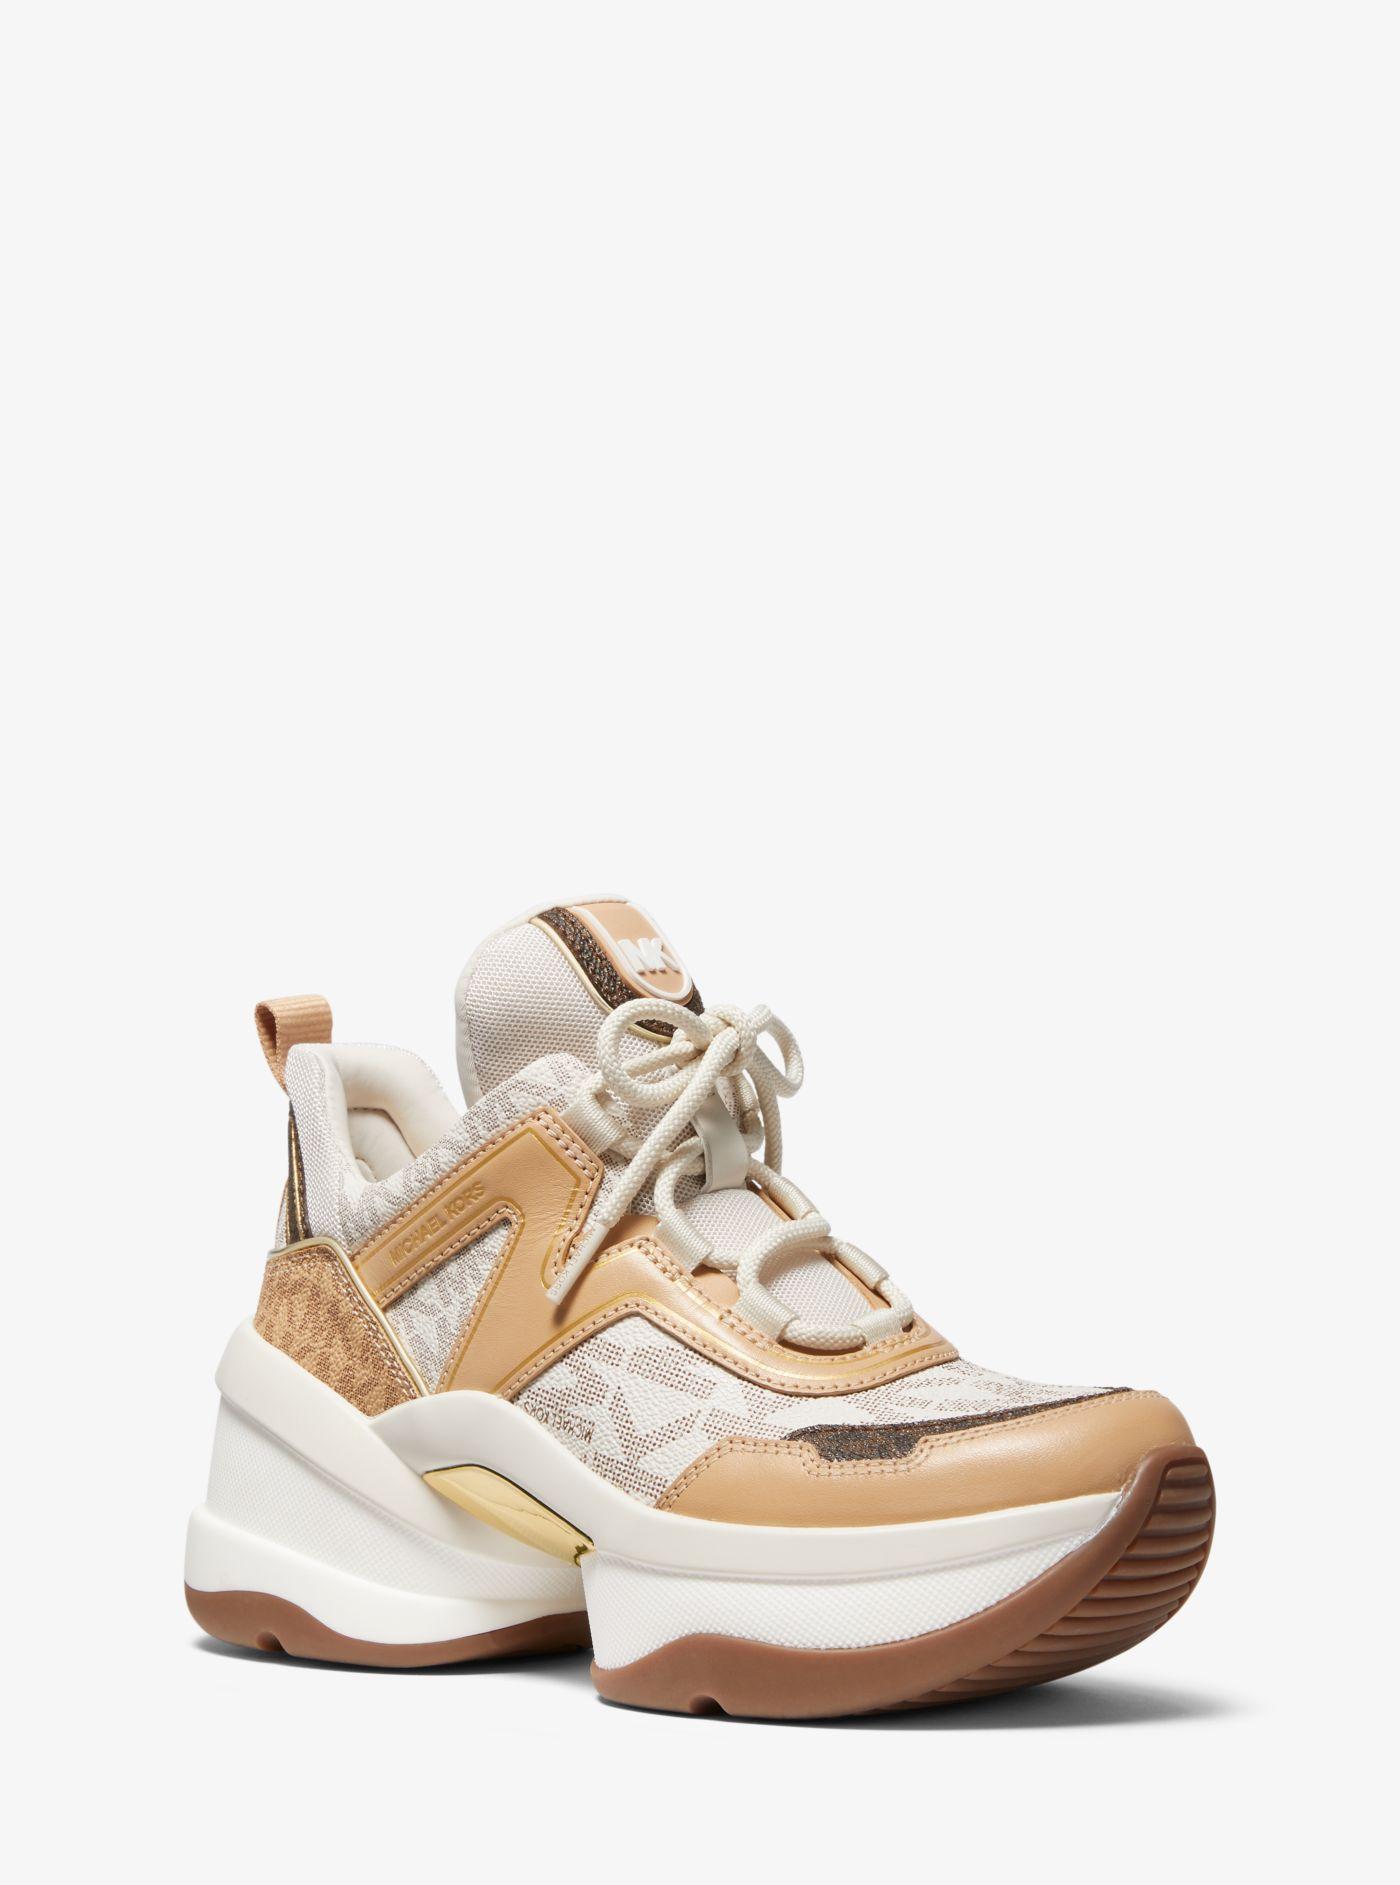 Michael Kors Olympia Logo And Leather Trainer in Natural | Lyst